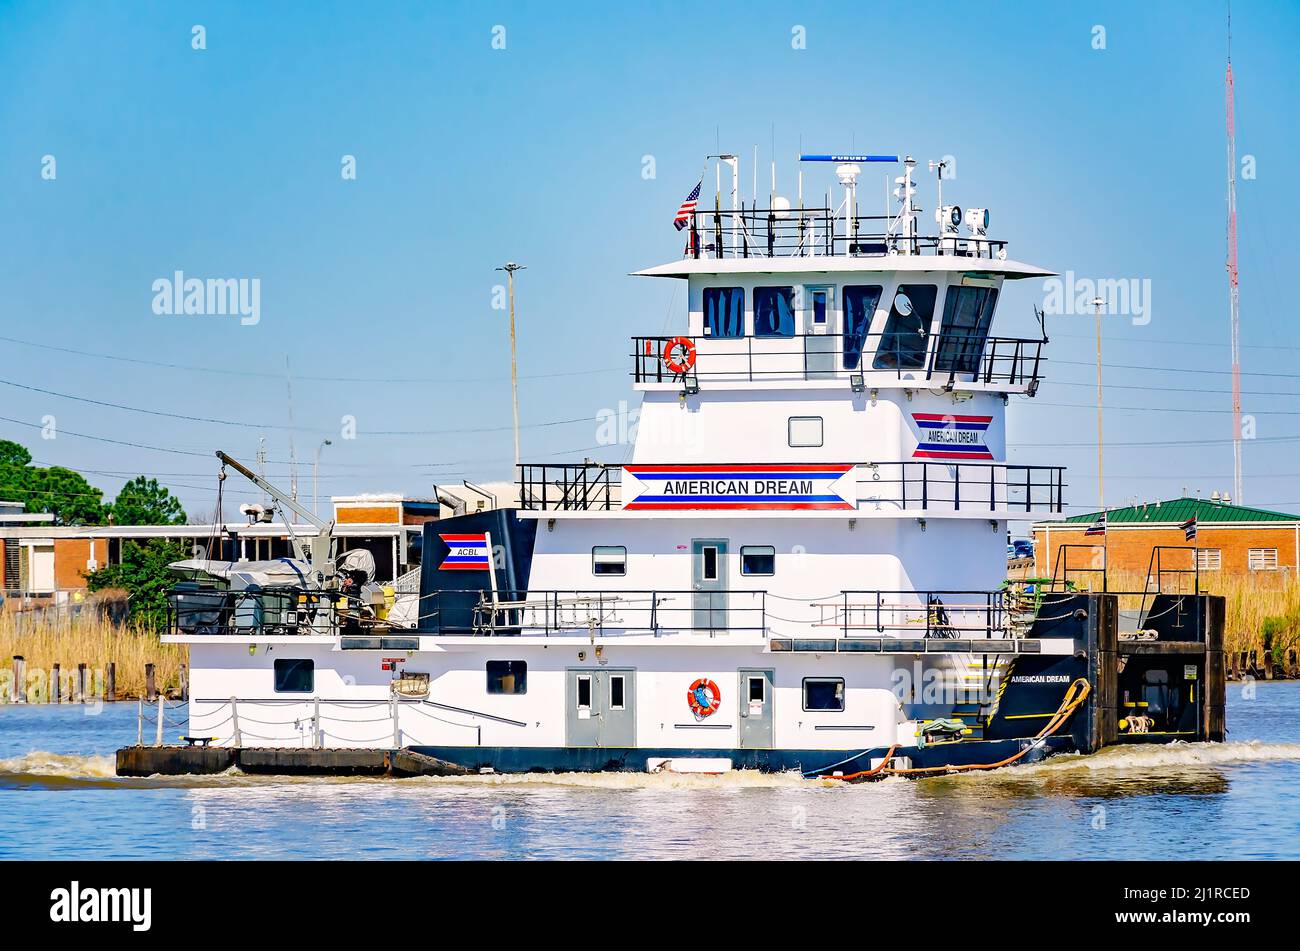 American Dream, a twin-screw towboat, is pictured on the Mobile River, March 25, 2022, in Mobile, Alabama. The ship was built in 2014. Stock Photo